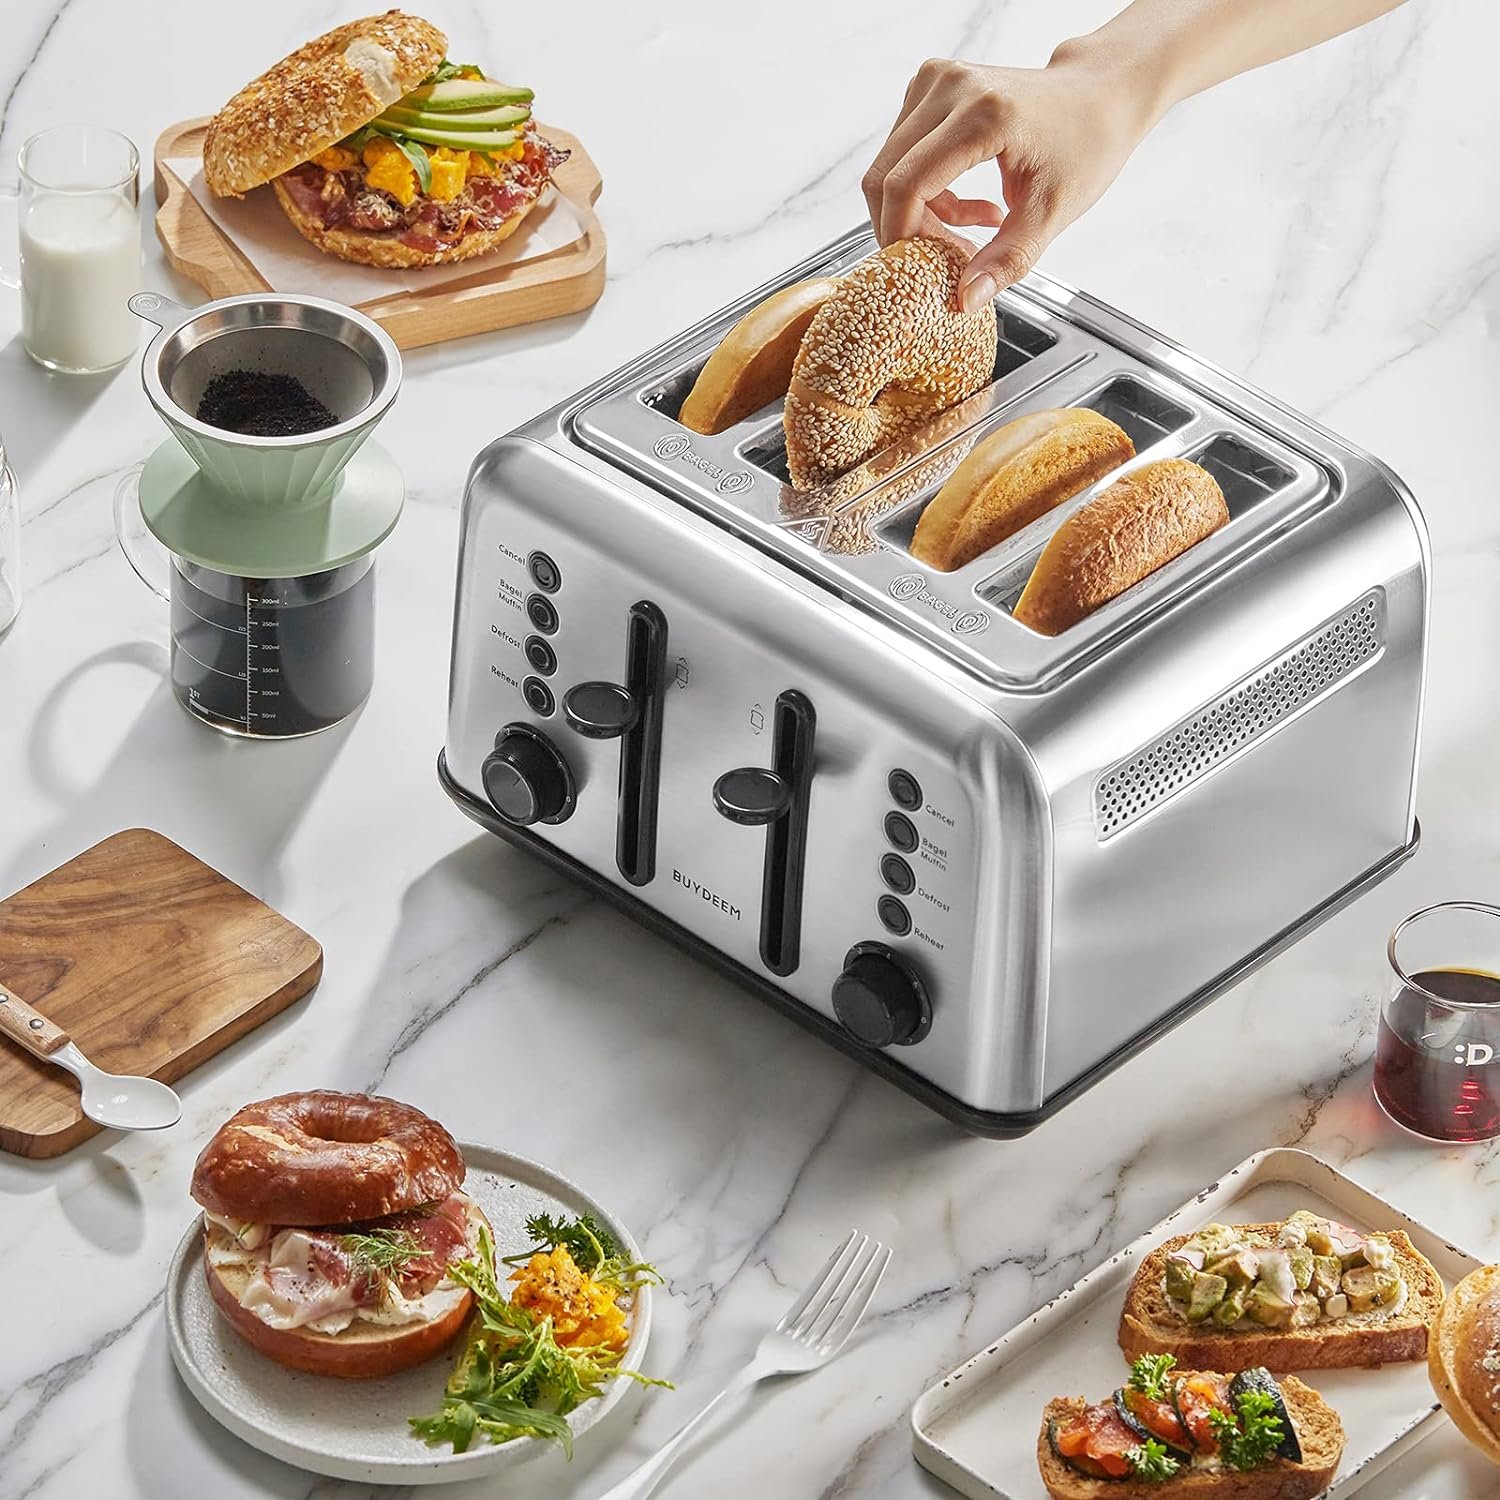 BUYDEEM DT620 2-Slice Toaster, Extra Wide Slots, Retro Stainless Steel with High Lift Lever, Bagel and Muffin Function, Removal Crumb Tray, 7-Shade Settings,Cozy Greenish